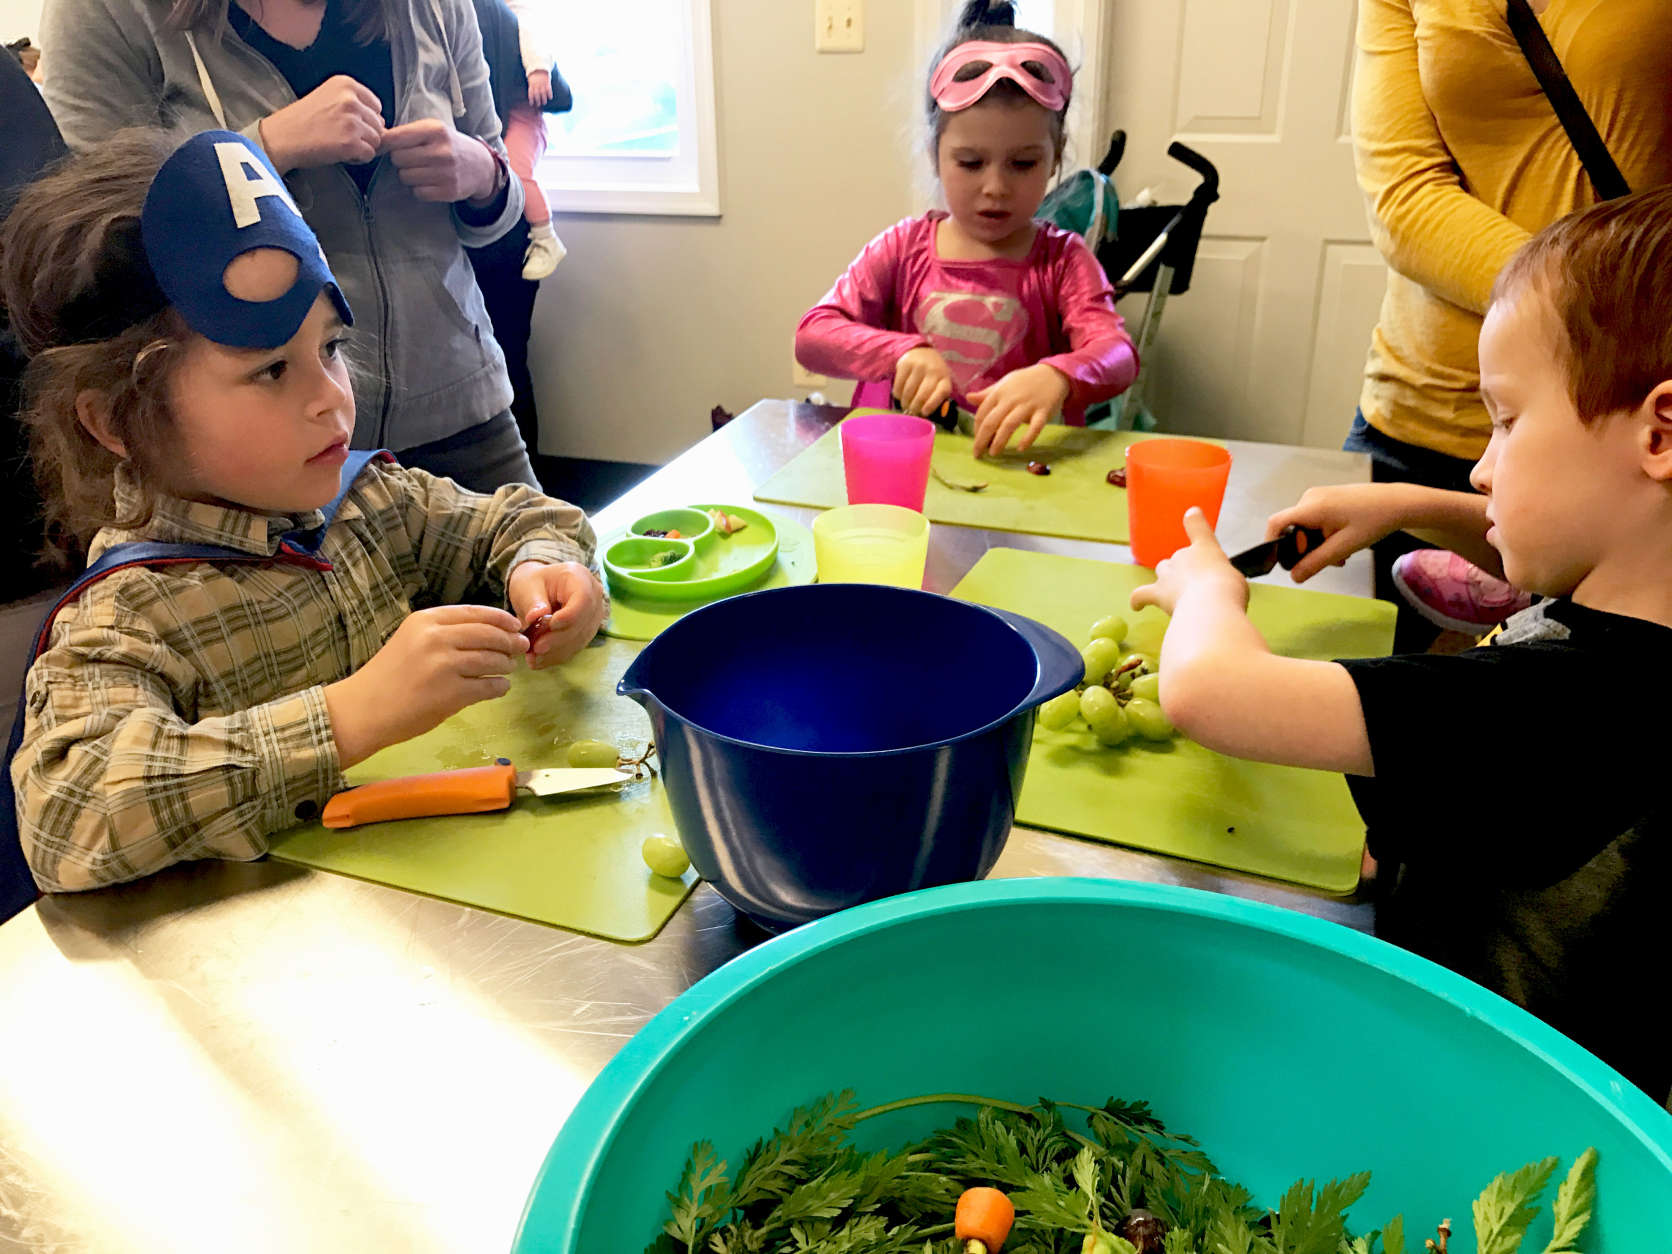 At Yum Pediatrics in Spotsylvania, Virginia, children and their parents can sign up to take cooking classes. (WTOP/Rachel Nania) 